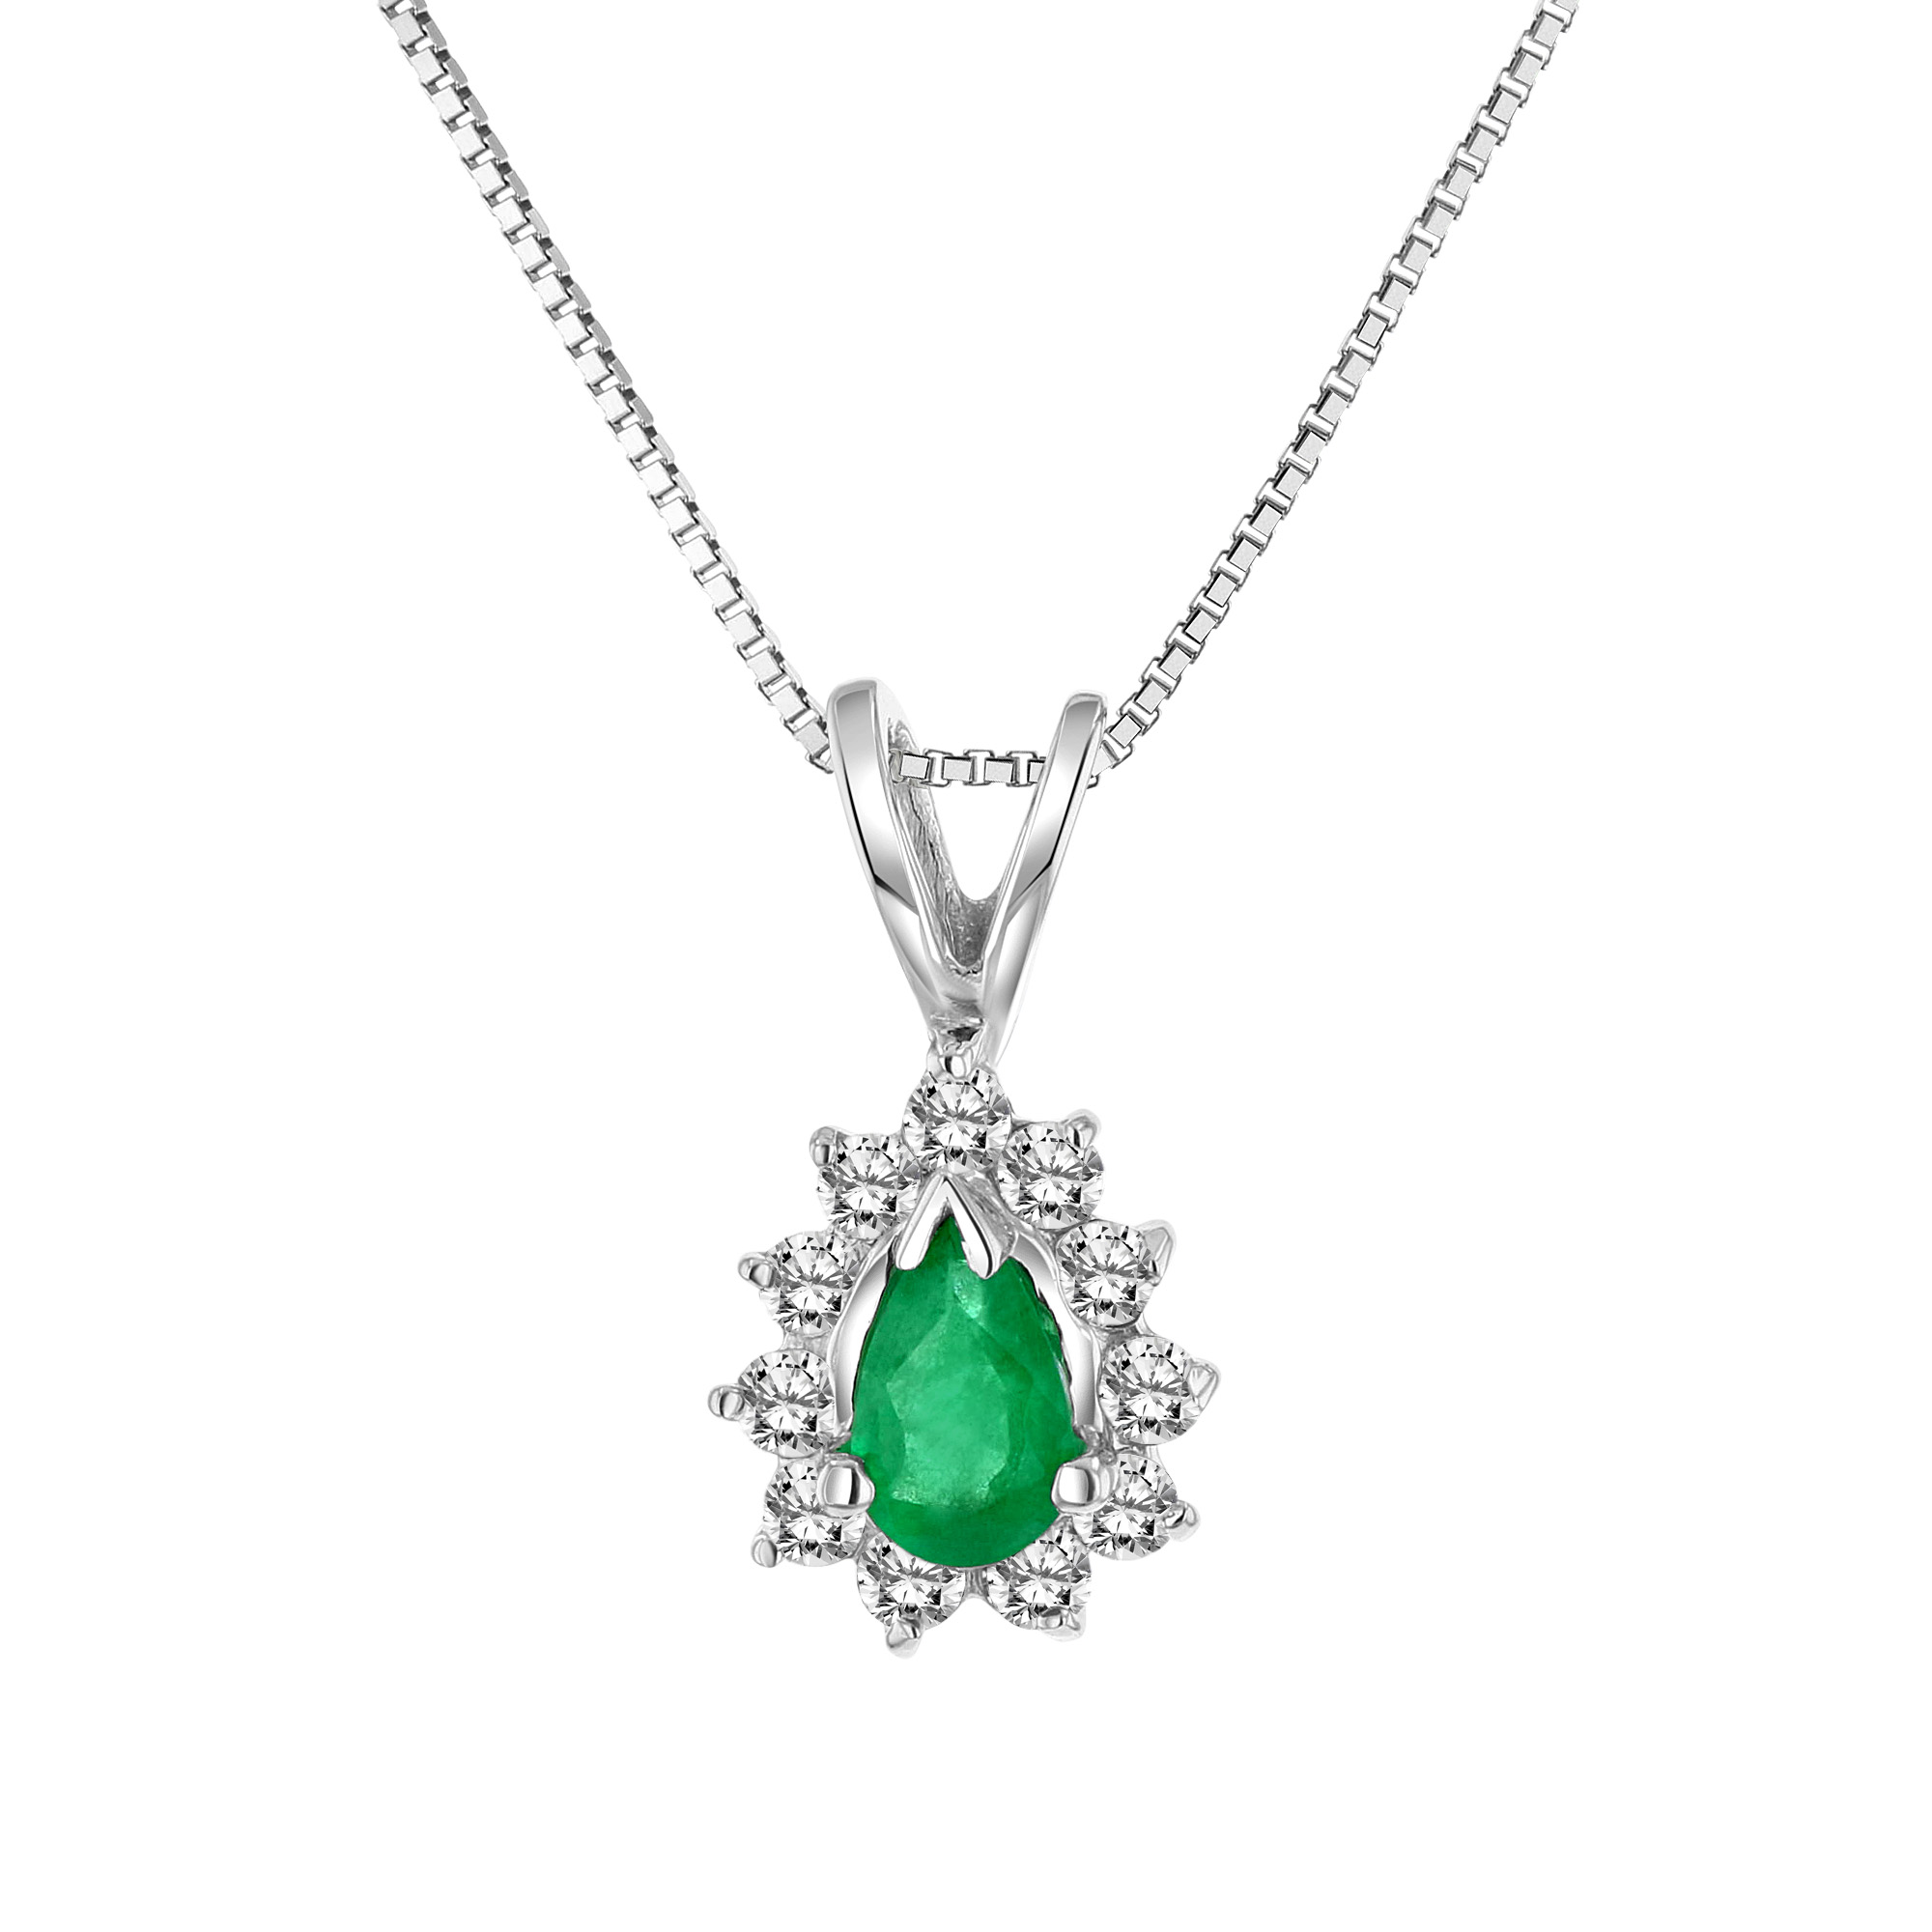 View 0.35cttw  Diamond and Emerald Pendant in 14k Gold